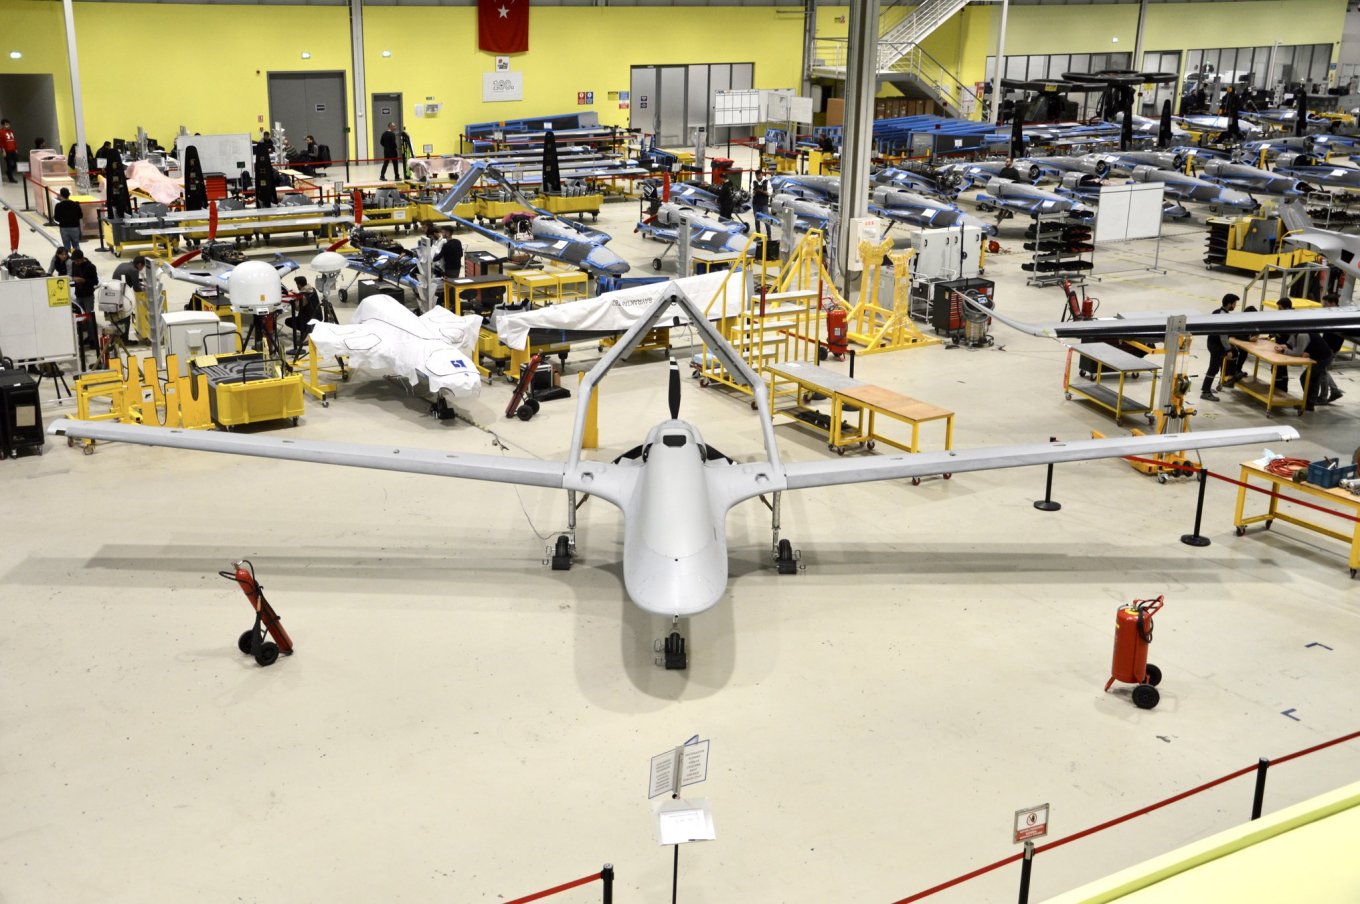 The Bayraktar TB3 unmanned combat aerial vehicle production facility Defense Express Baykar Production Facility is Overloaded with Orders for New Bayraktar TB3 UCAV